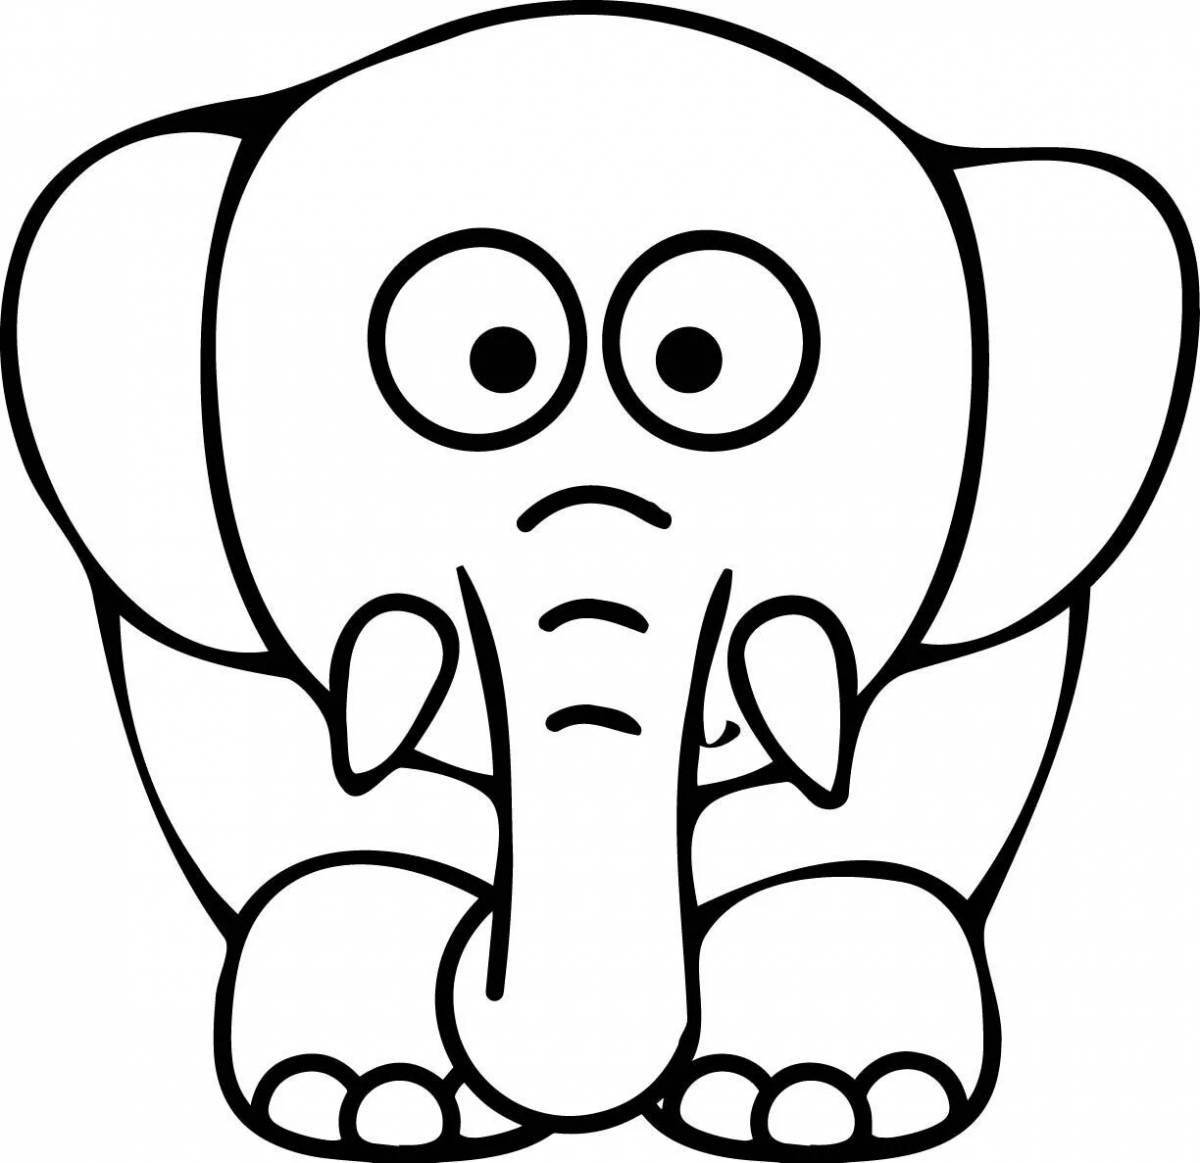 Fun elephant coloring for 3-4 year olds